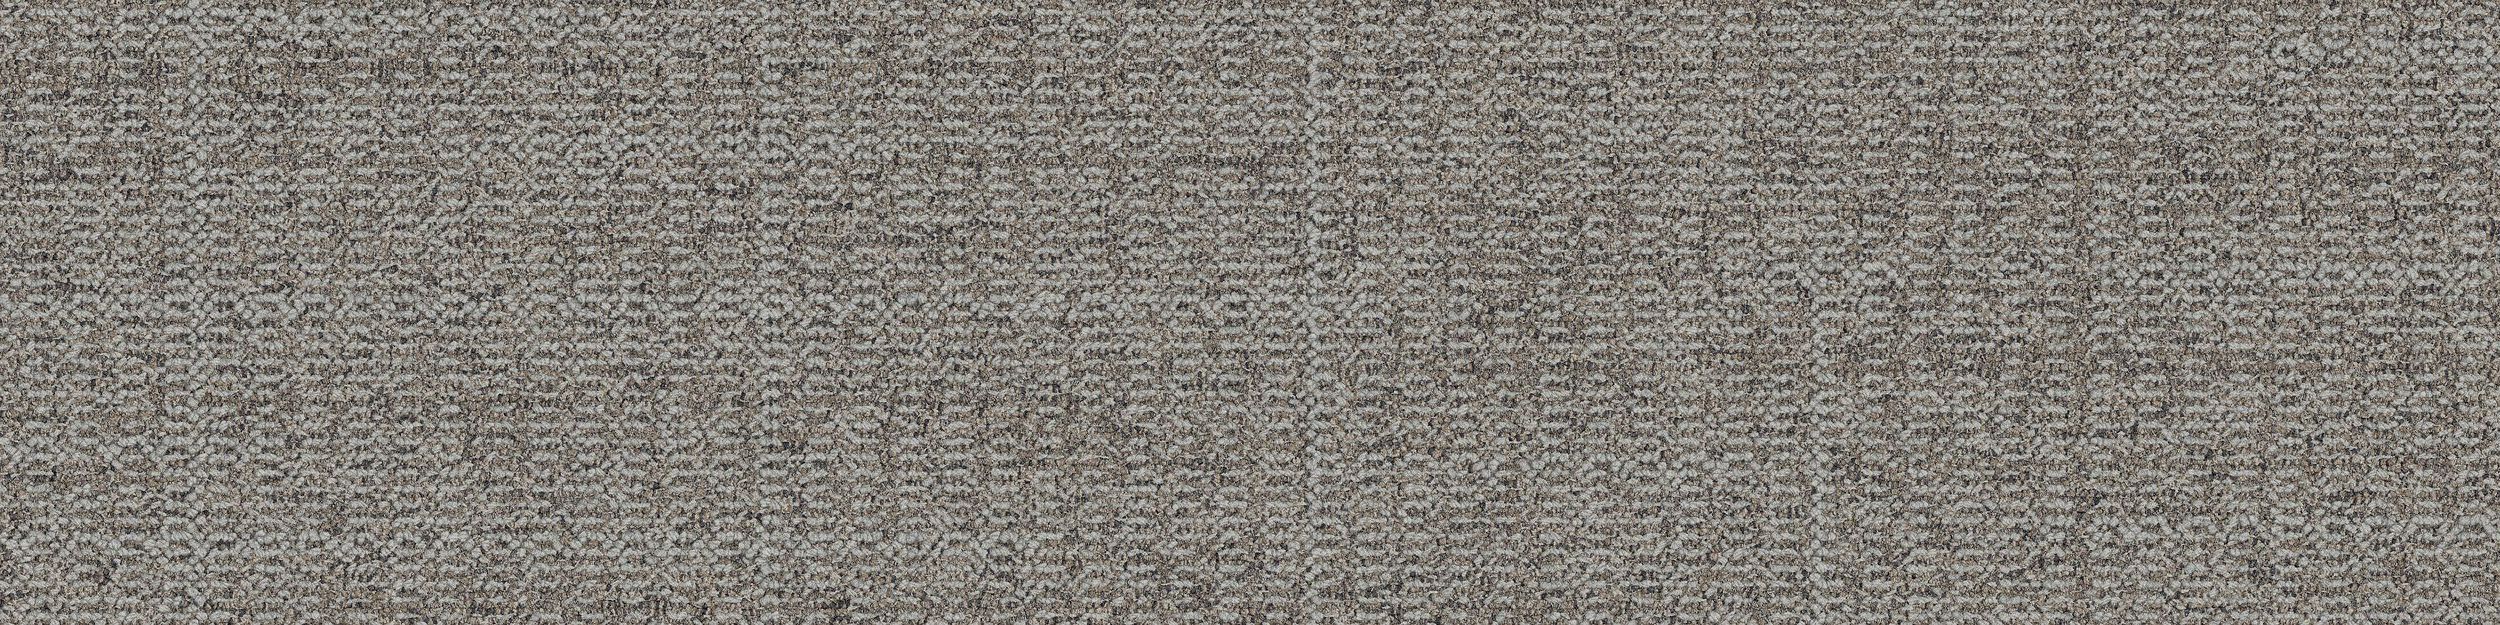 Open Air 401 Carpet Tile In Stone image number 2